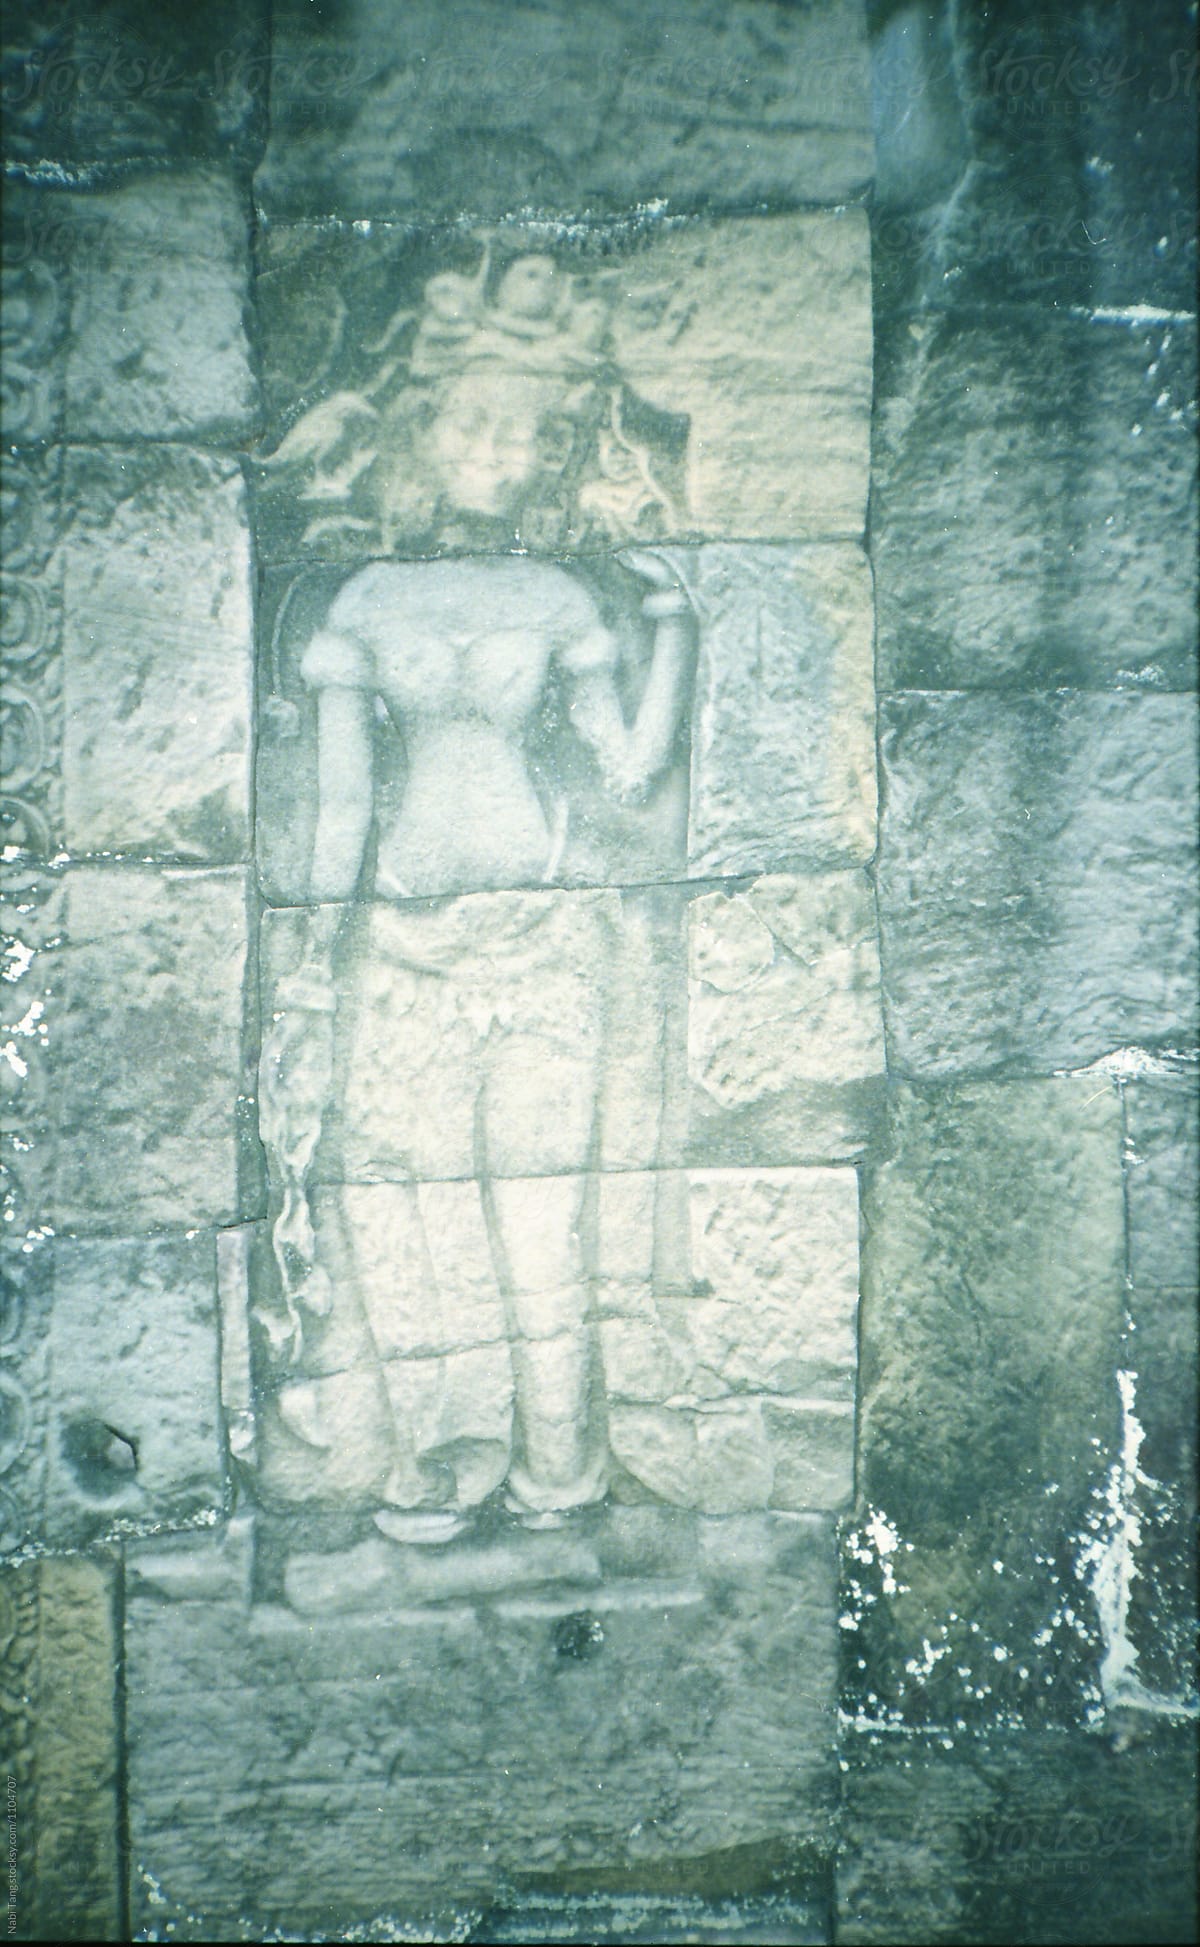 Goddess sculpture on the temple wall in Siem Reap (Cambodia)